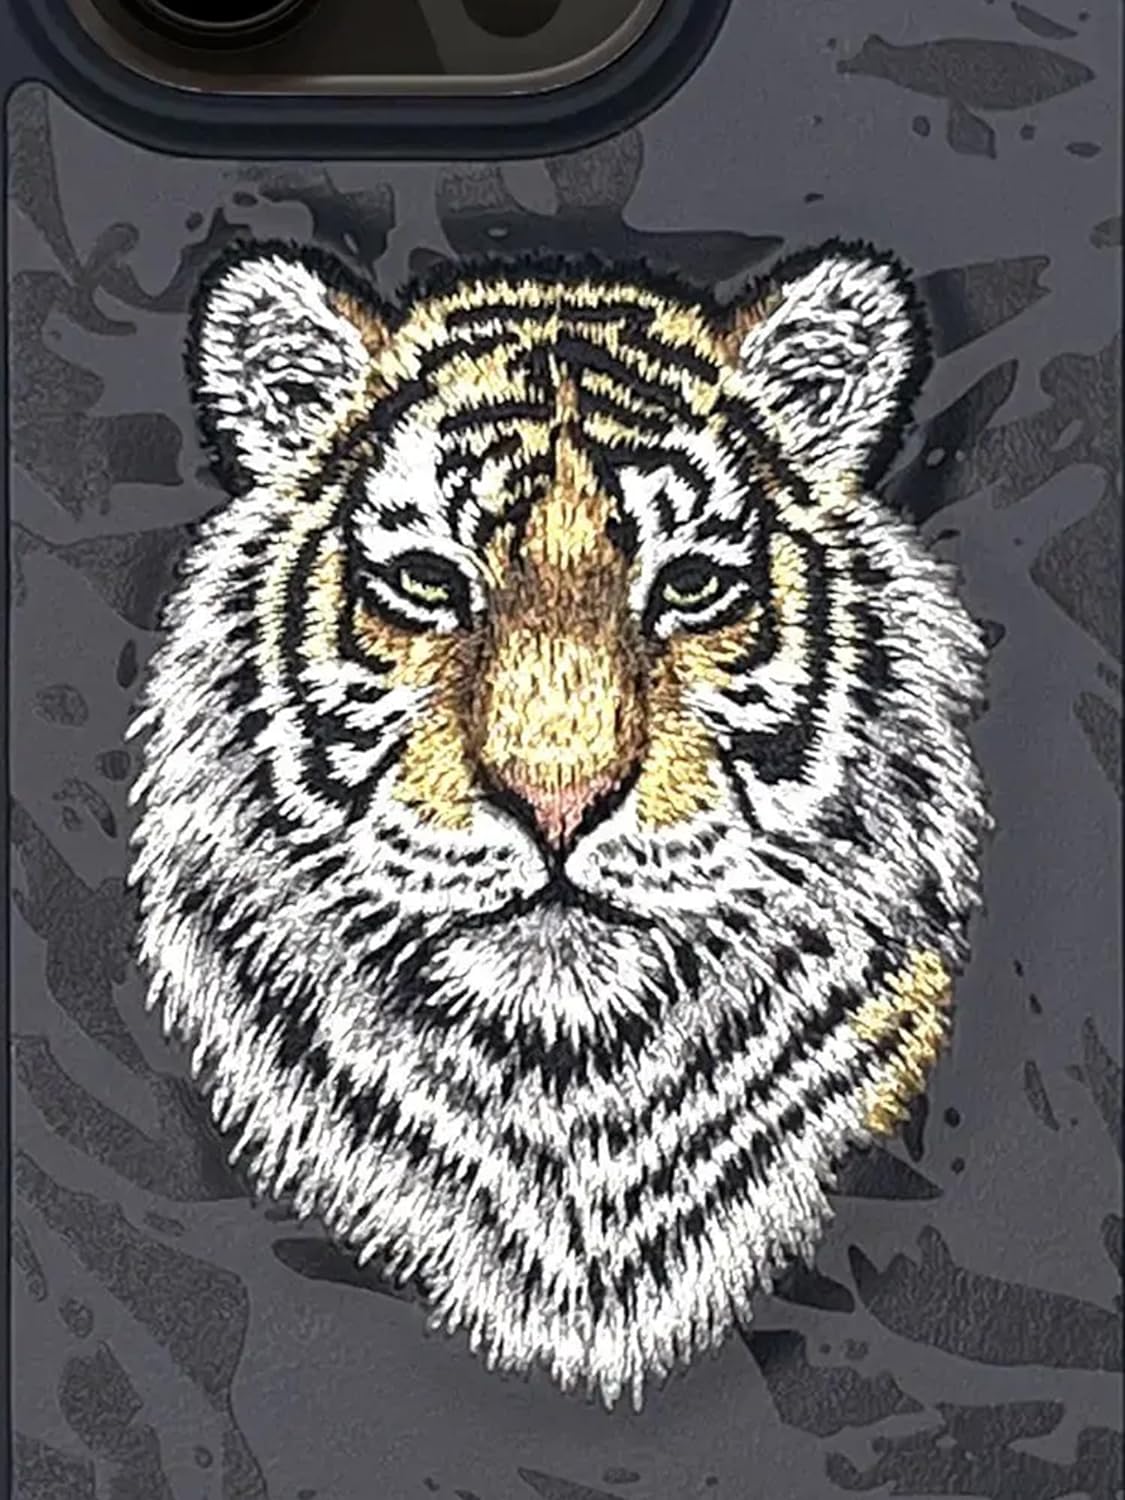 iPhone 15 Pro Santa Barbara Snow Leopard Embroidery Case Cover - Tiger / Wolf